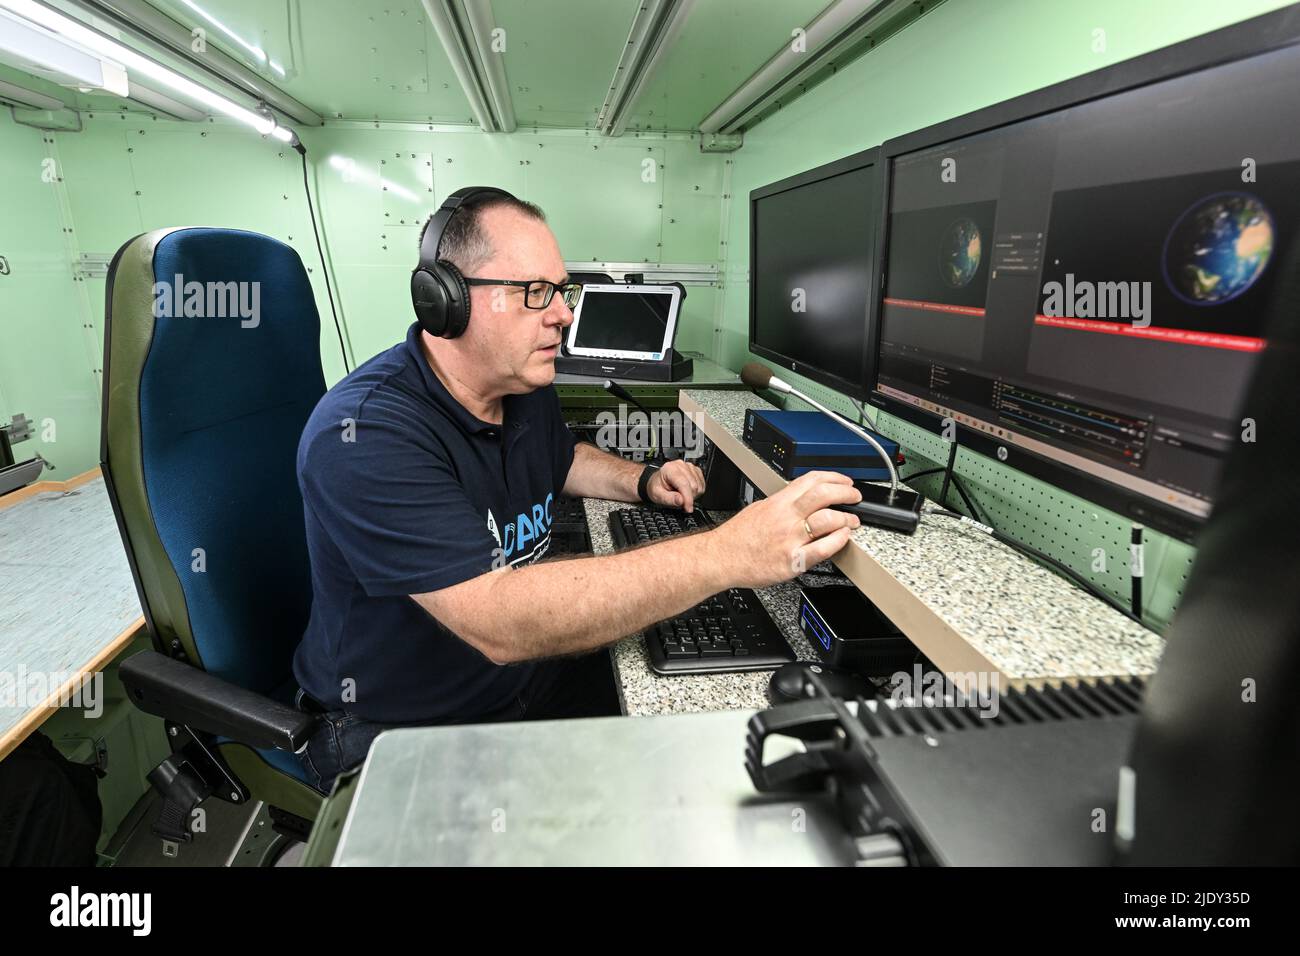 Friedrichshafen, Germany. 23rd June, 2022. Robert Traussnig, DARC  Friedrichshafen chapter chairman, sits in the new emergency response  vehicle and makes radio contact with other radio operators. The former  military container, which houses